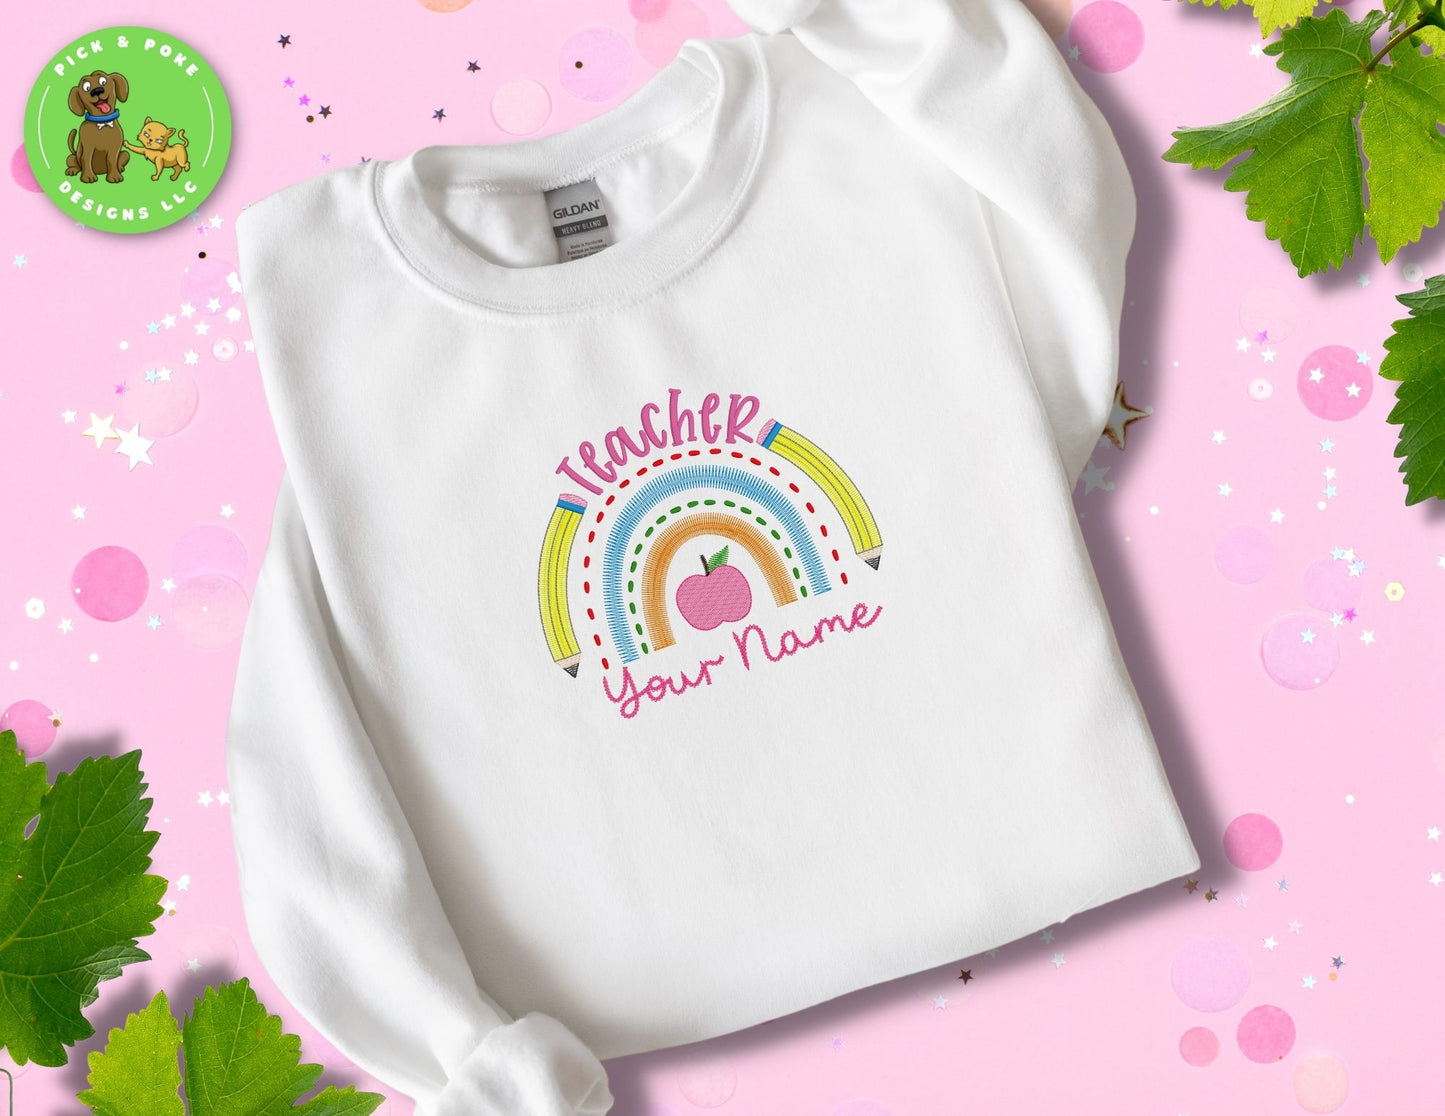 Embroidered Rainbow Teacher Crewneck Sweatshirt Personalized with Your Name or School Name